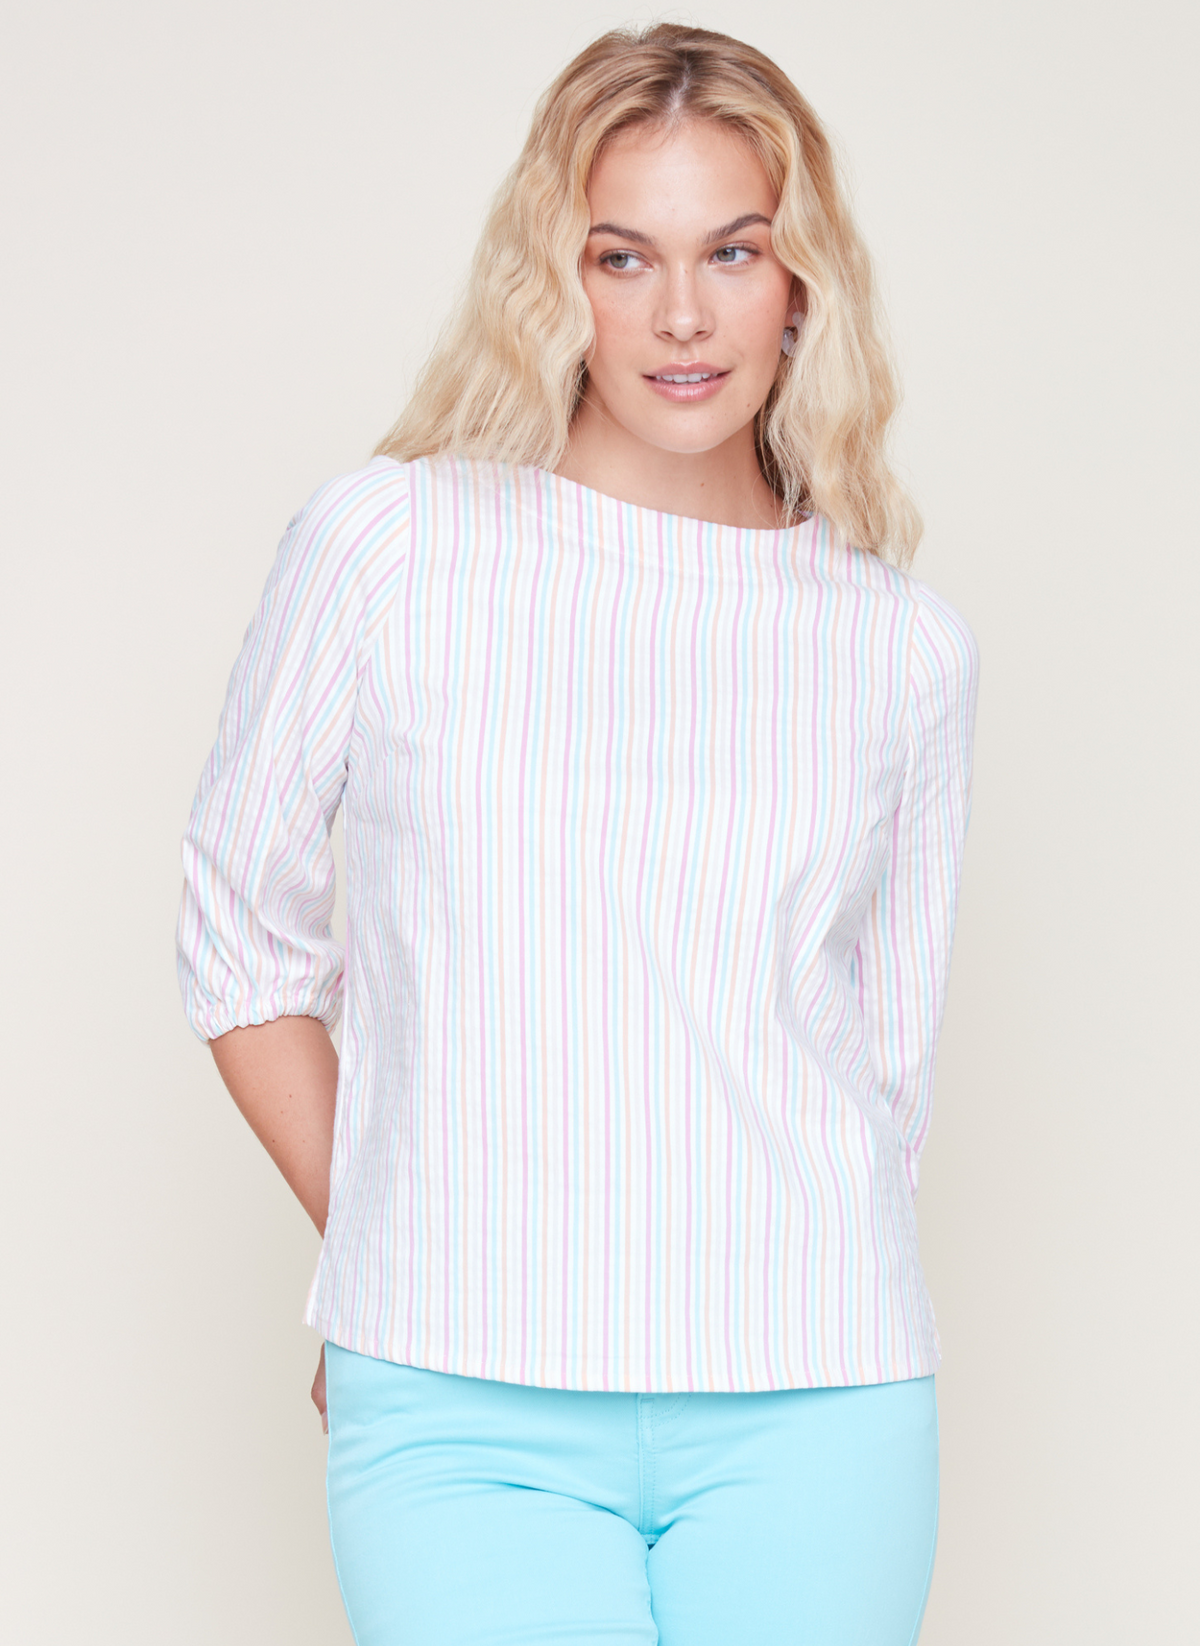 Candy Stripe Boatneck Top